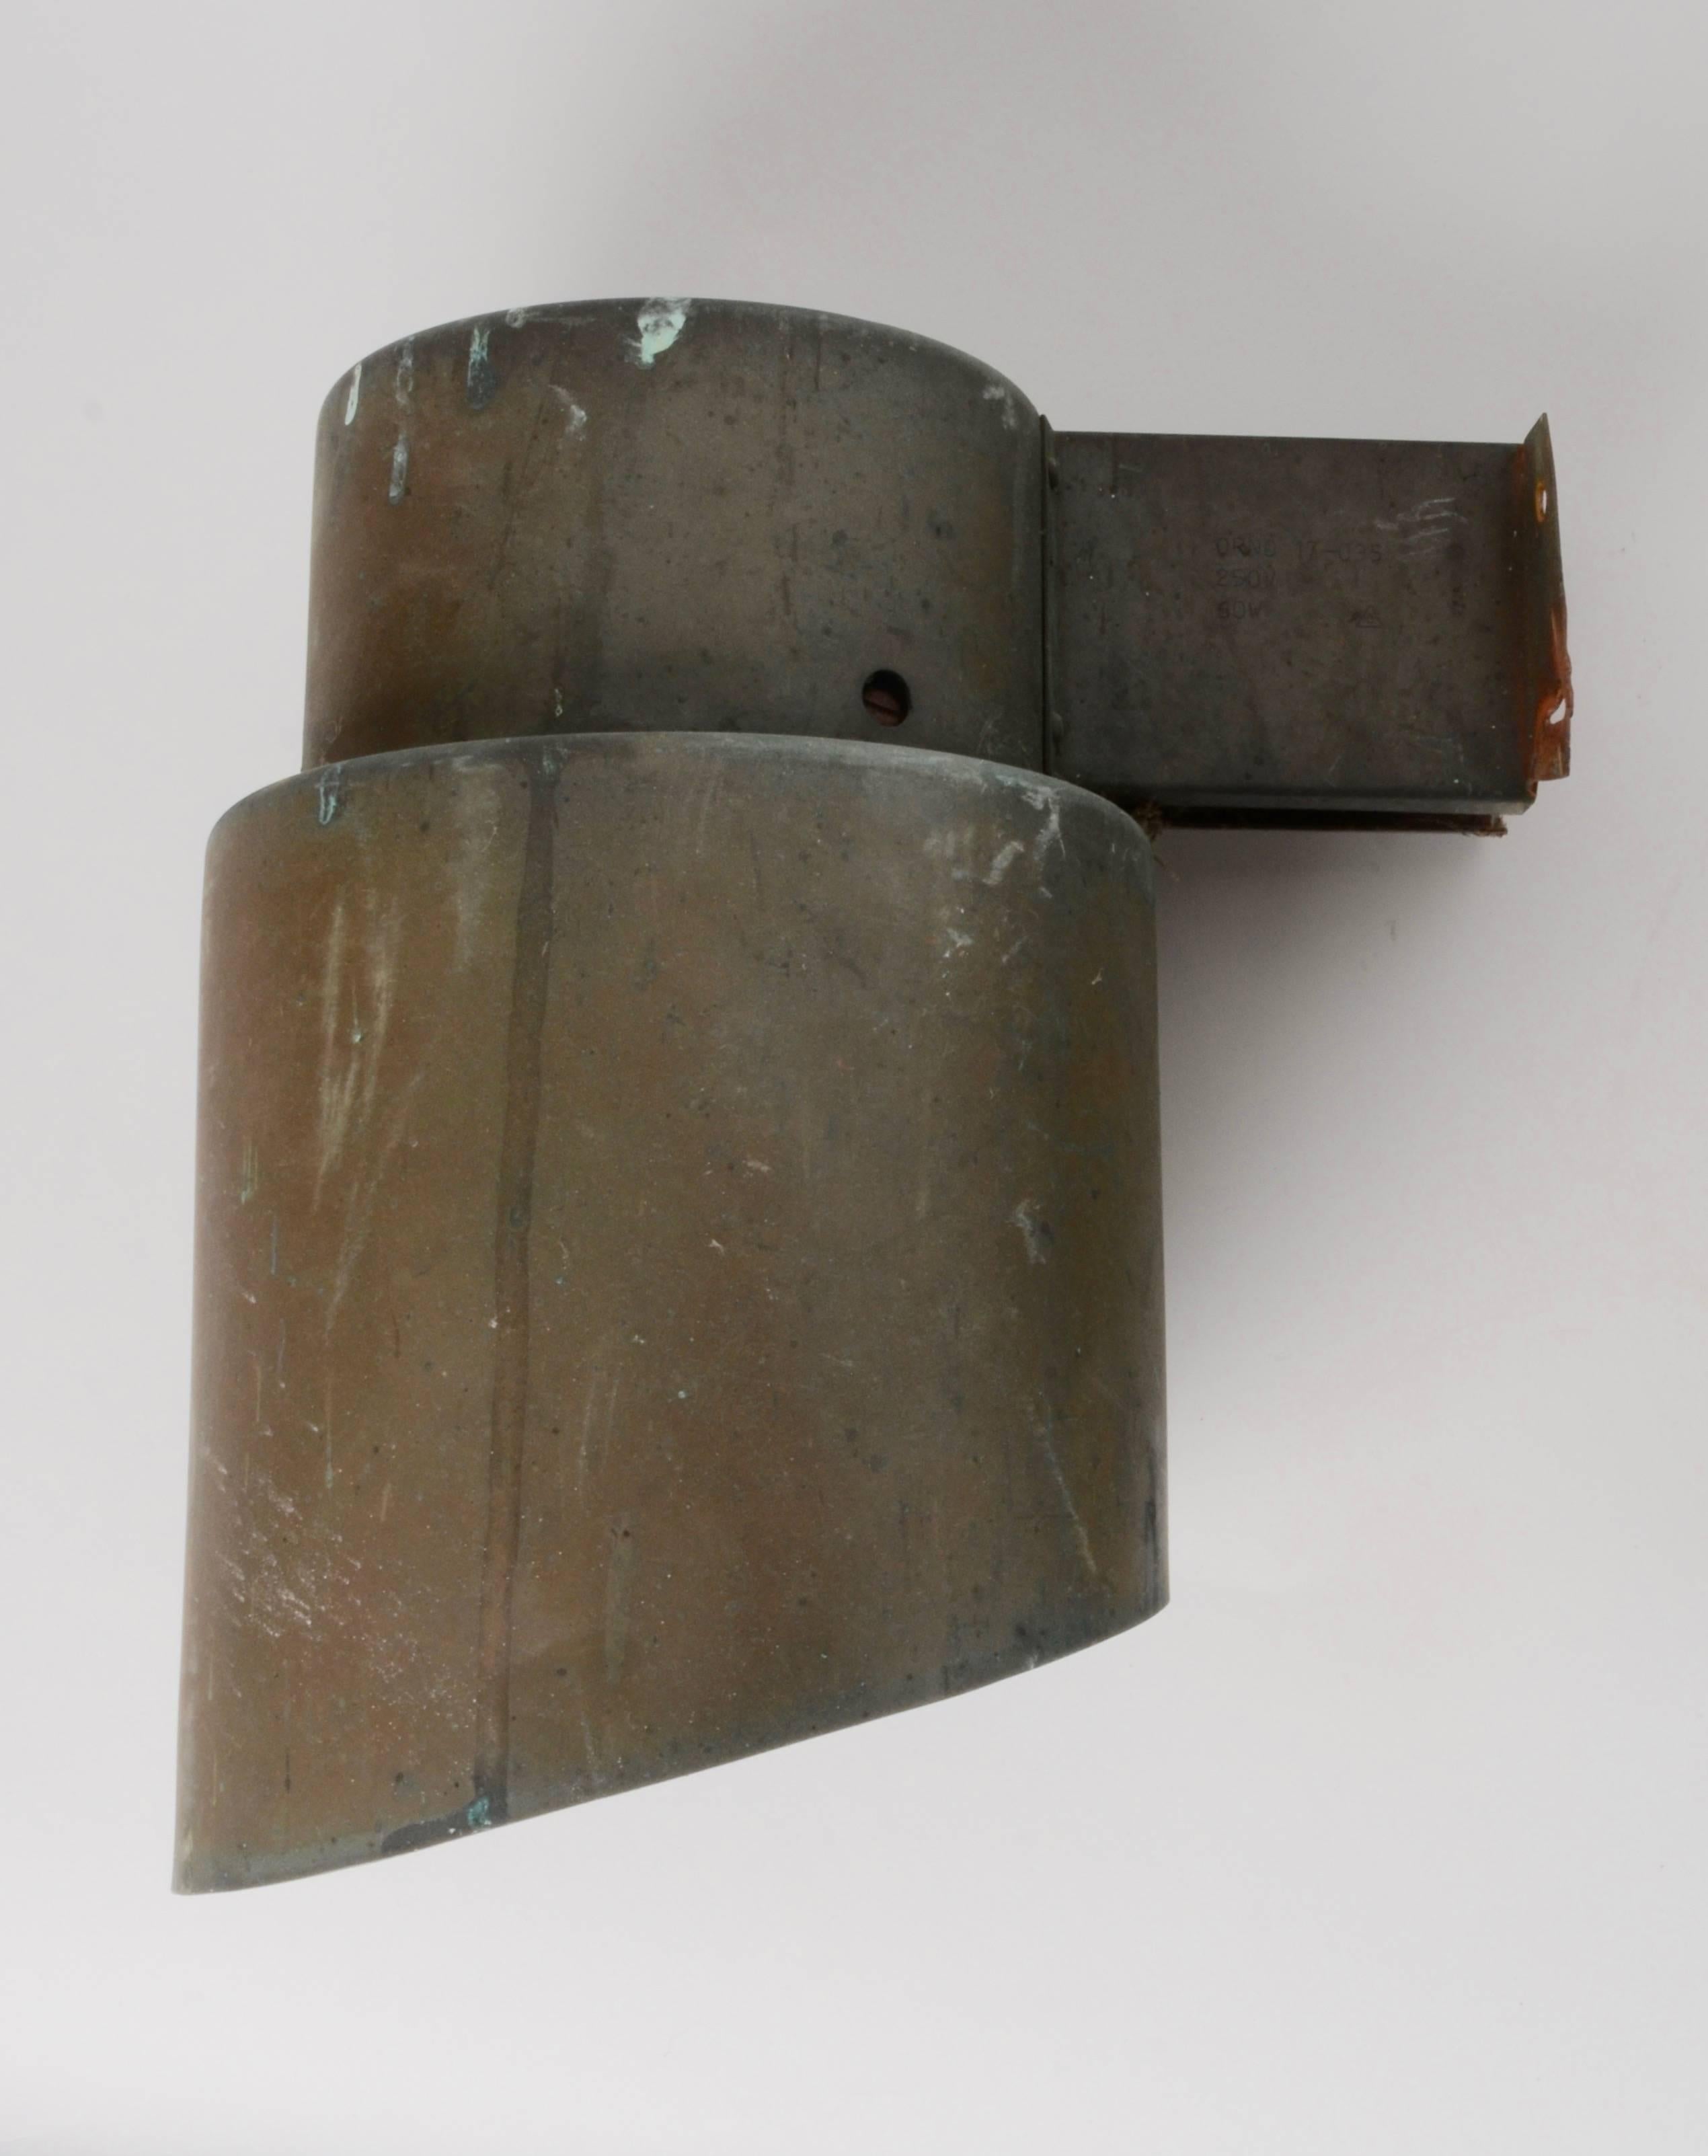 Six Brutalist wall lamps in copper by Orno, Finland, mid-1900s. Six pieces available.

 